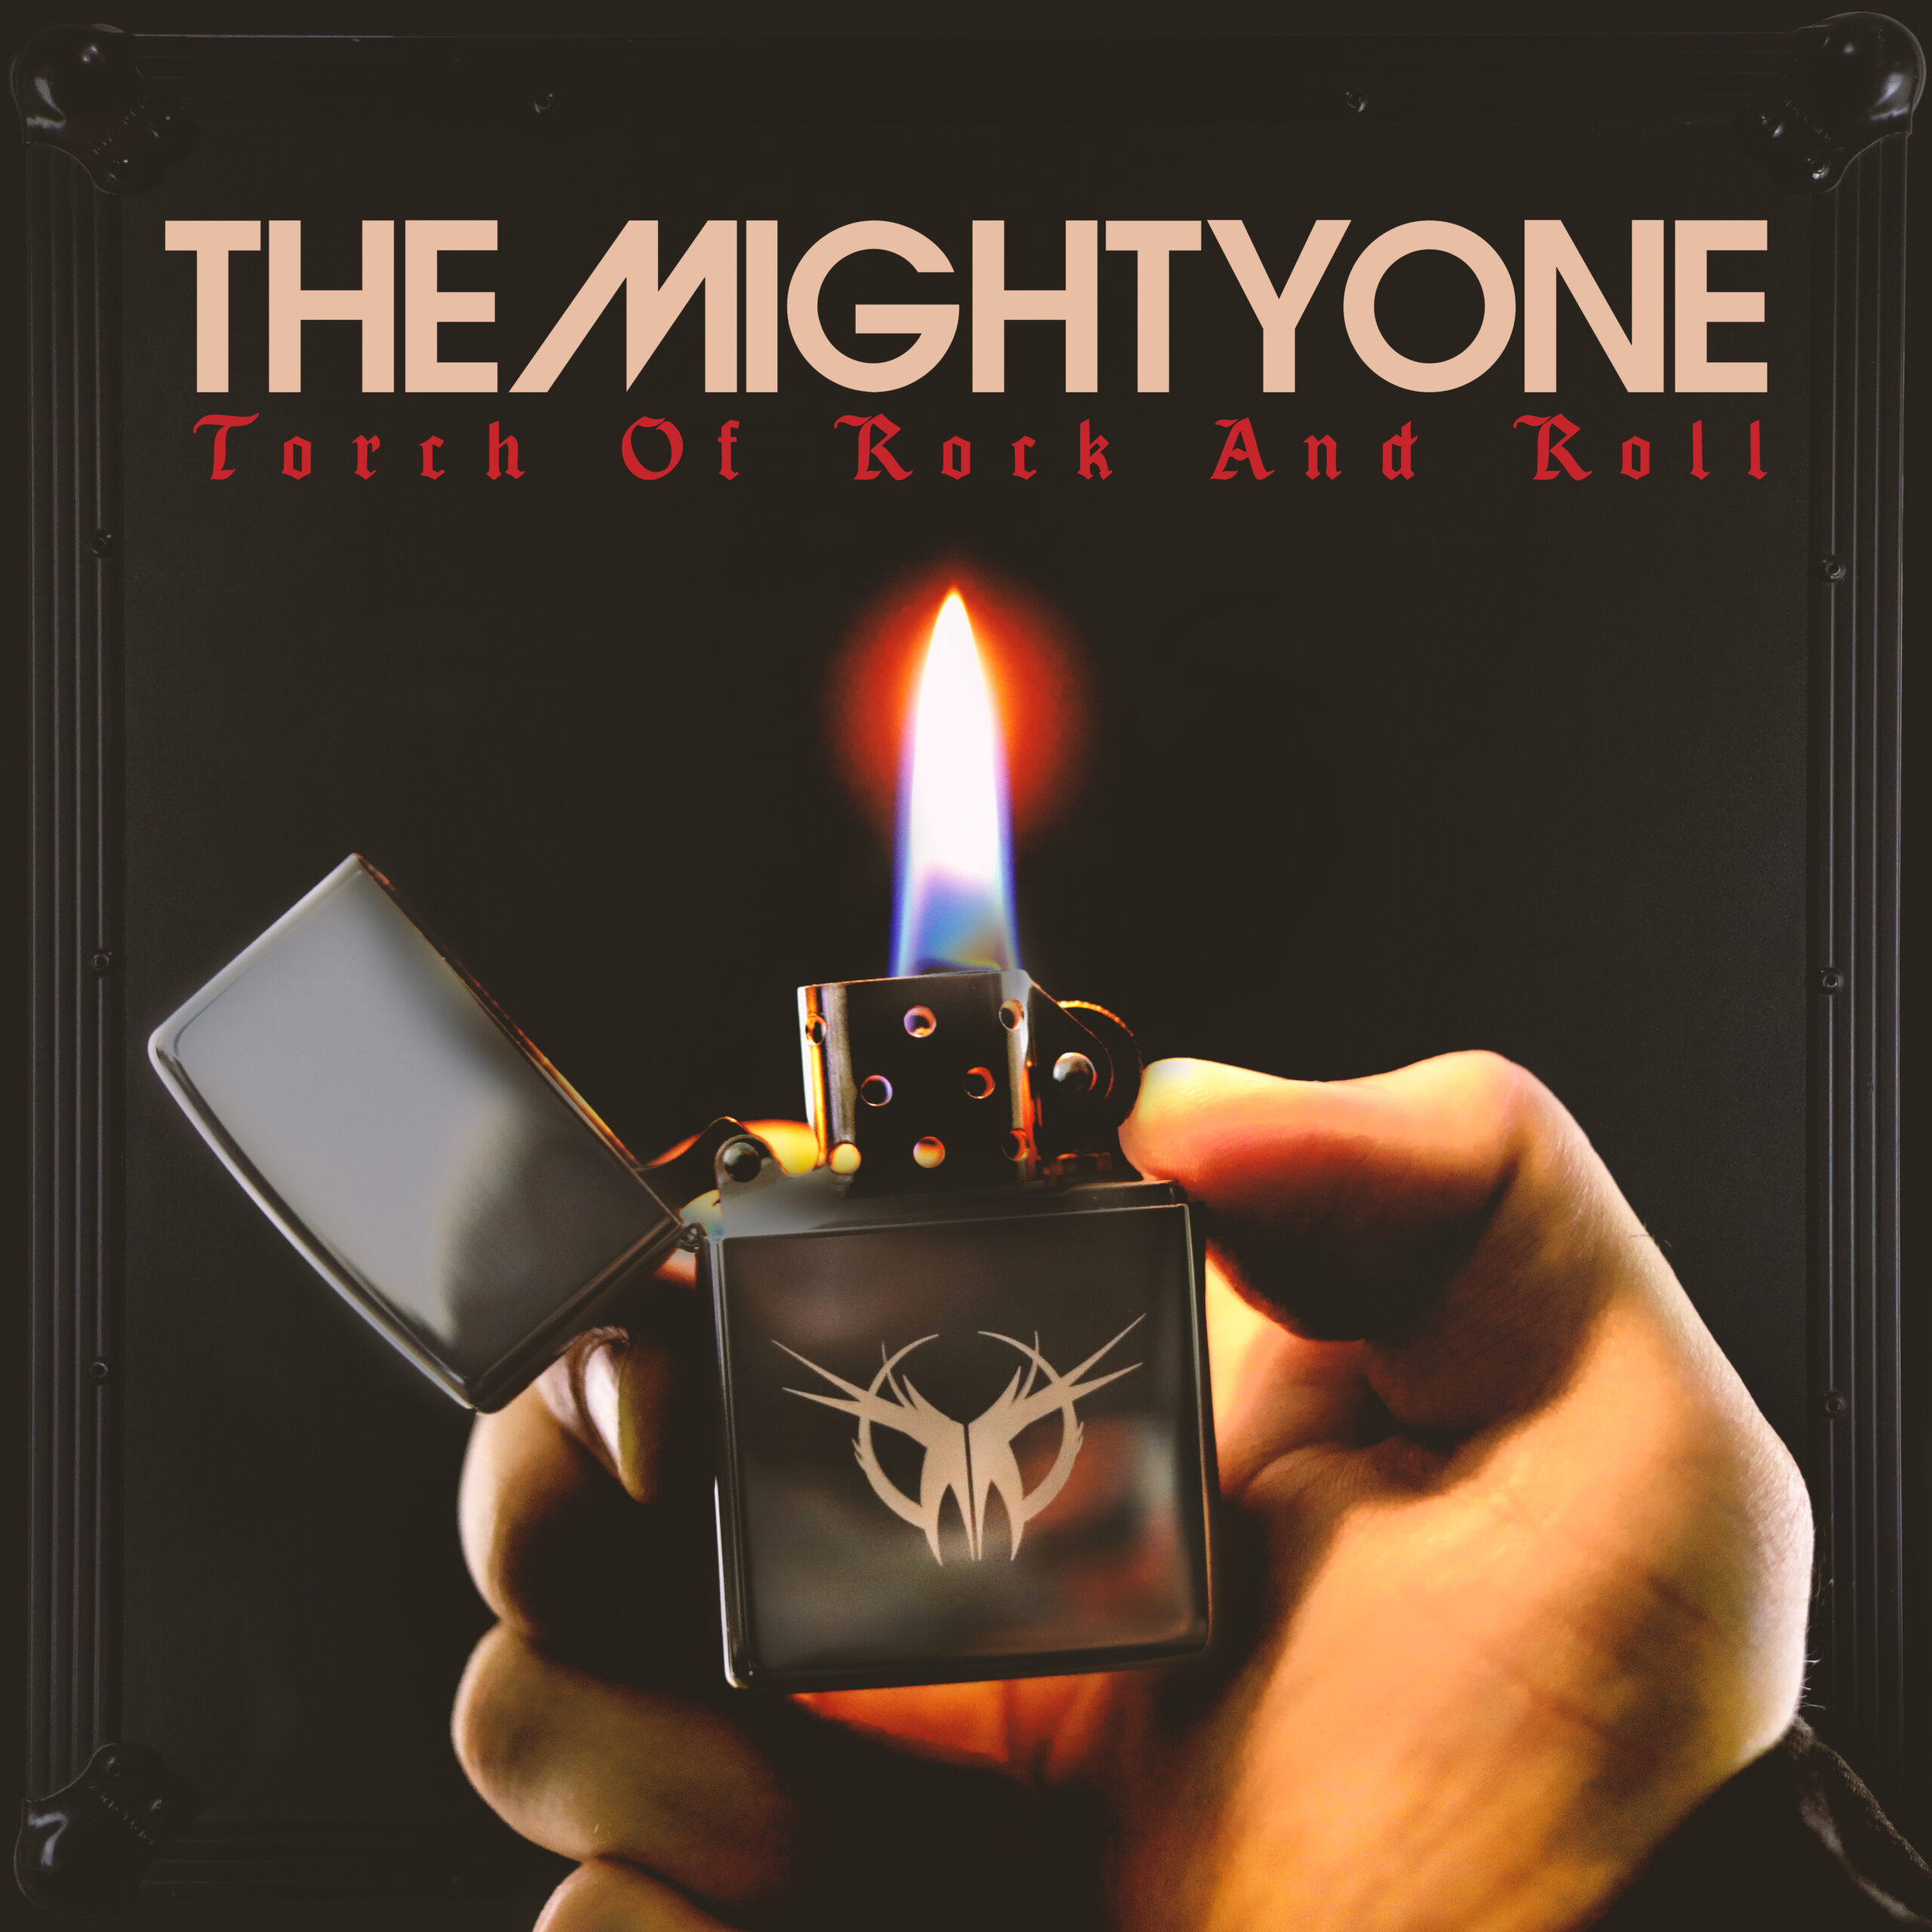 The Mighty One (CDN) – Torch Of Rock And Roll